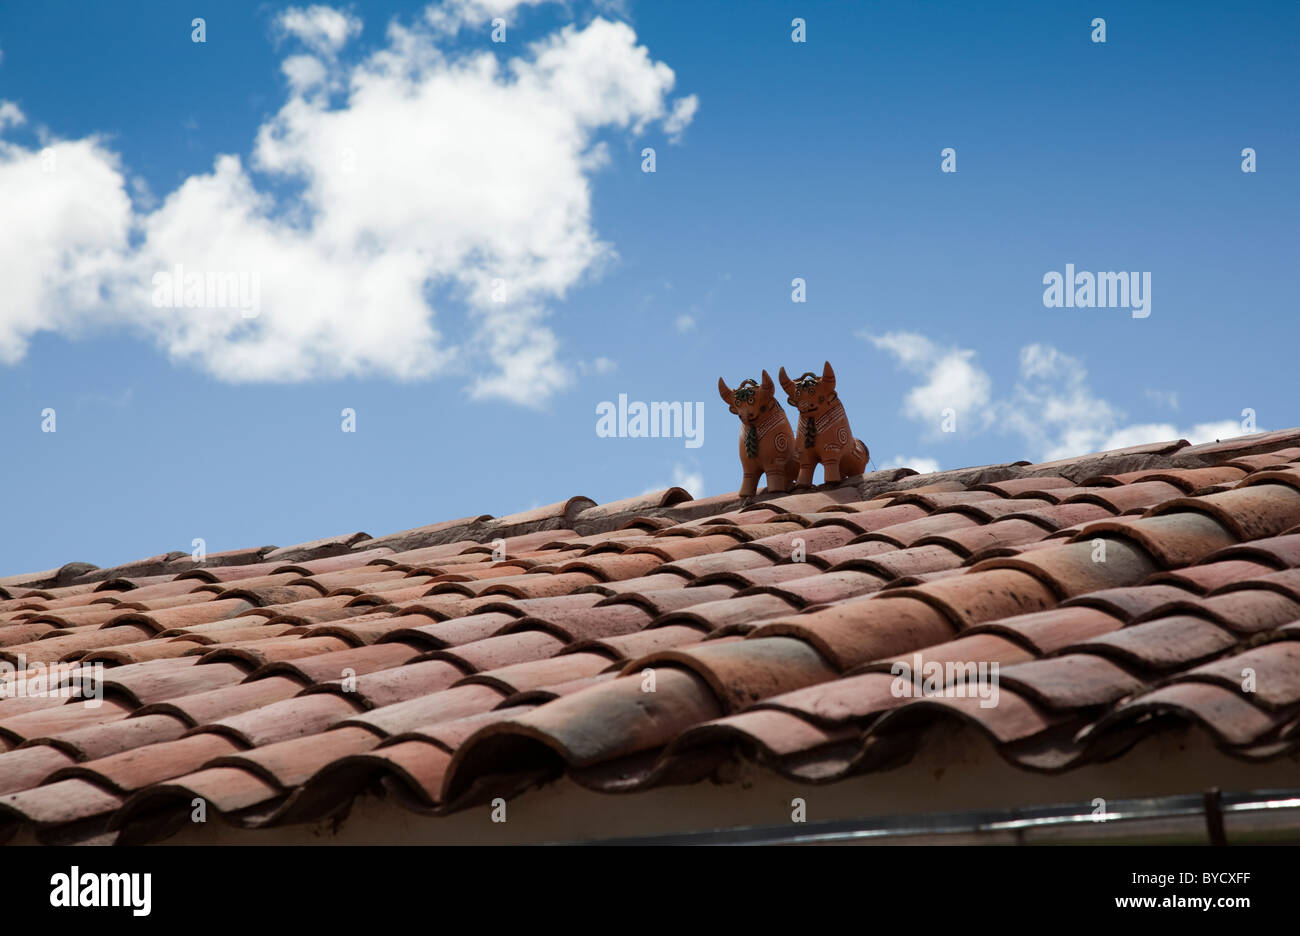 Rooftop twin Pottery Bulls giving good luck to Peruvian houses, Pucara, Peru, South America. Stock Photo